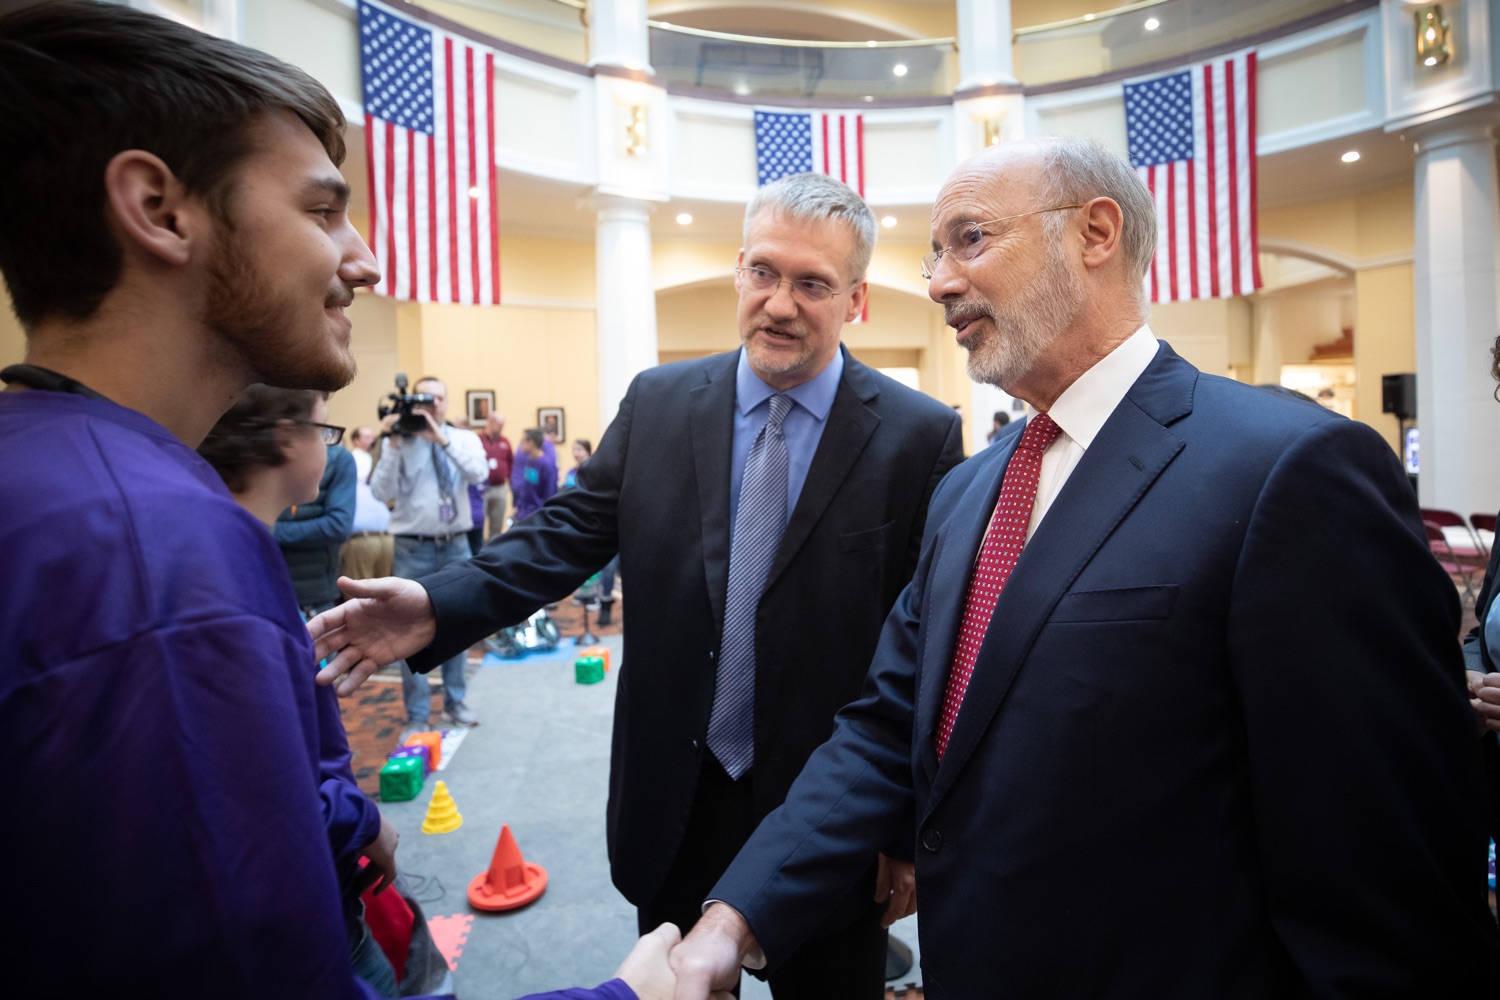 Pennsylvania Governor Tom Wolf meeting with students at the robotics demonstration.Celebrating the success of the PAsmart workforce development program to create educational opportunities at schools across the commonwealth, Governor Tom Wolf welcomed more than 50 students from the Pennsylvania Rural Robotics Initiative to the Capitol today. The students from nine western Pennsylvania school districts showcased their skills in coding, robotics and drone technology. The Wolf administration awarded the initiative a $299,000 PAsmart Advancing Grant earlier this year. Harrisburg, PA  Tuesday, November 12, 2019<br><a href="https://filesource.amperwave.net/commonwealthofpa/photo/17587_gov_pasmart_rural_robotics_dz_022.jpg" target="_blank">⇣ Download Photo</a>